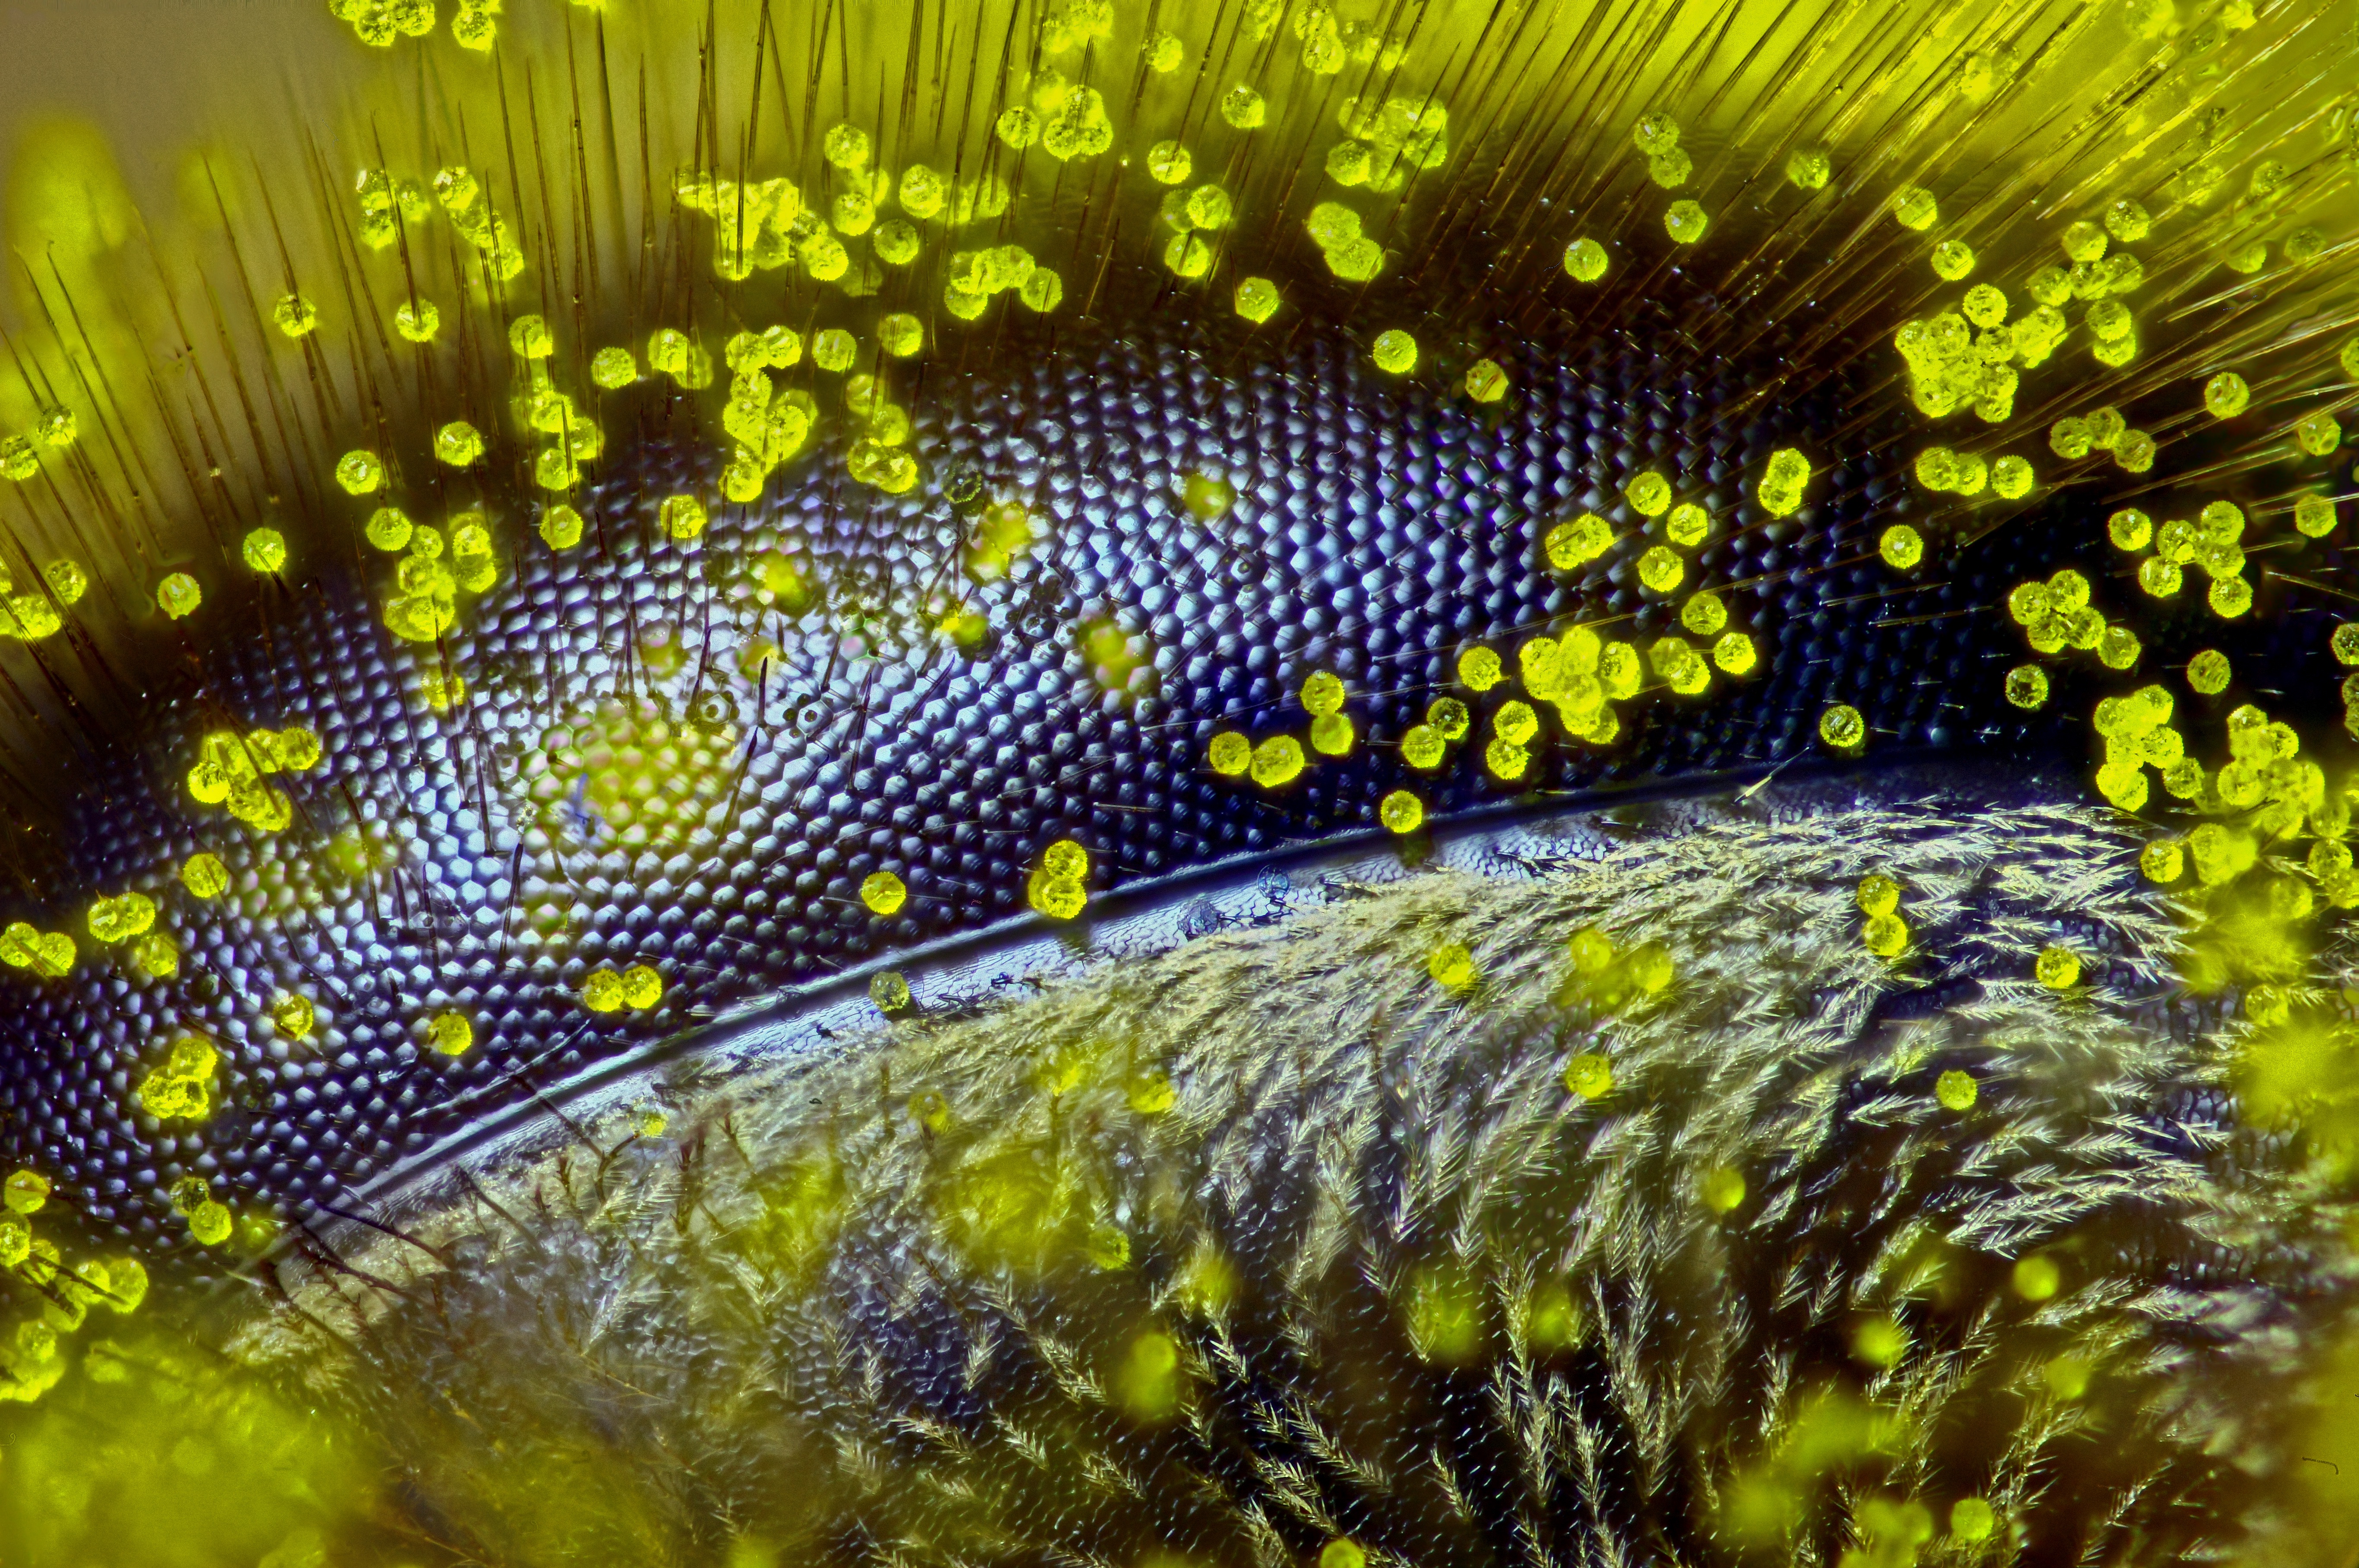 10 Incredible Images Of The Tiny World Around Us